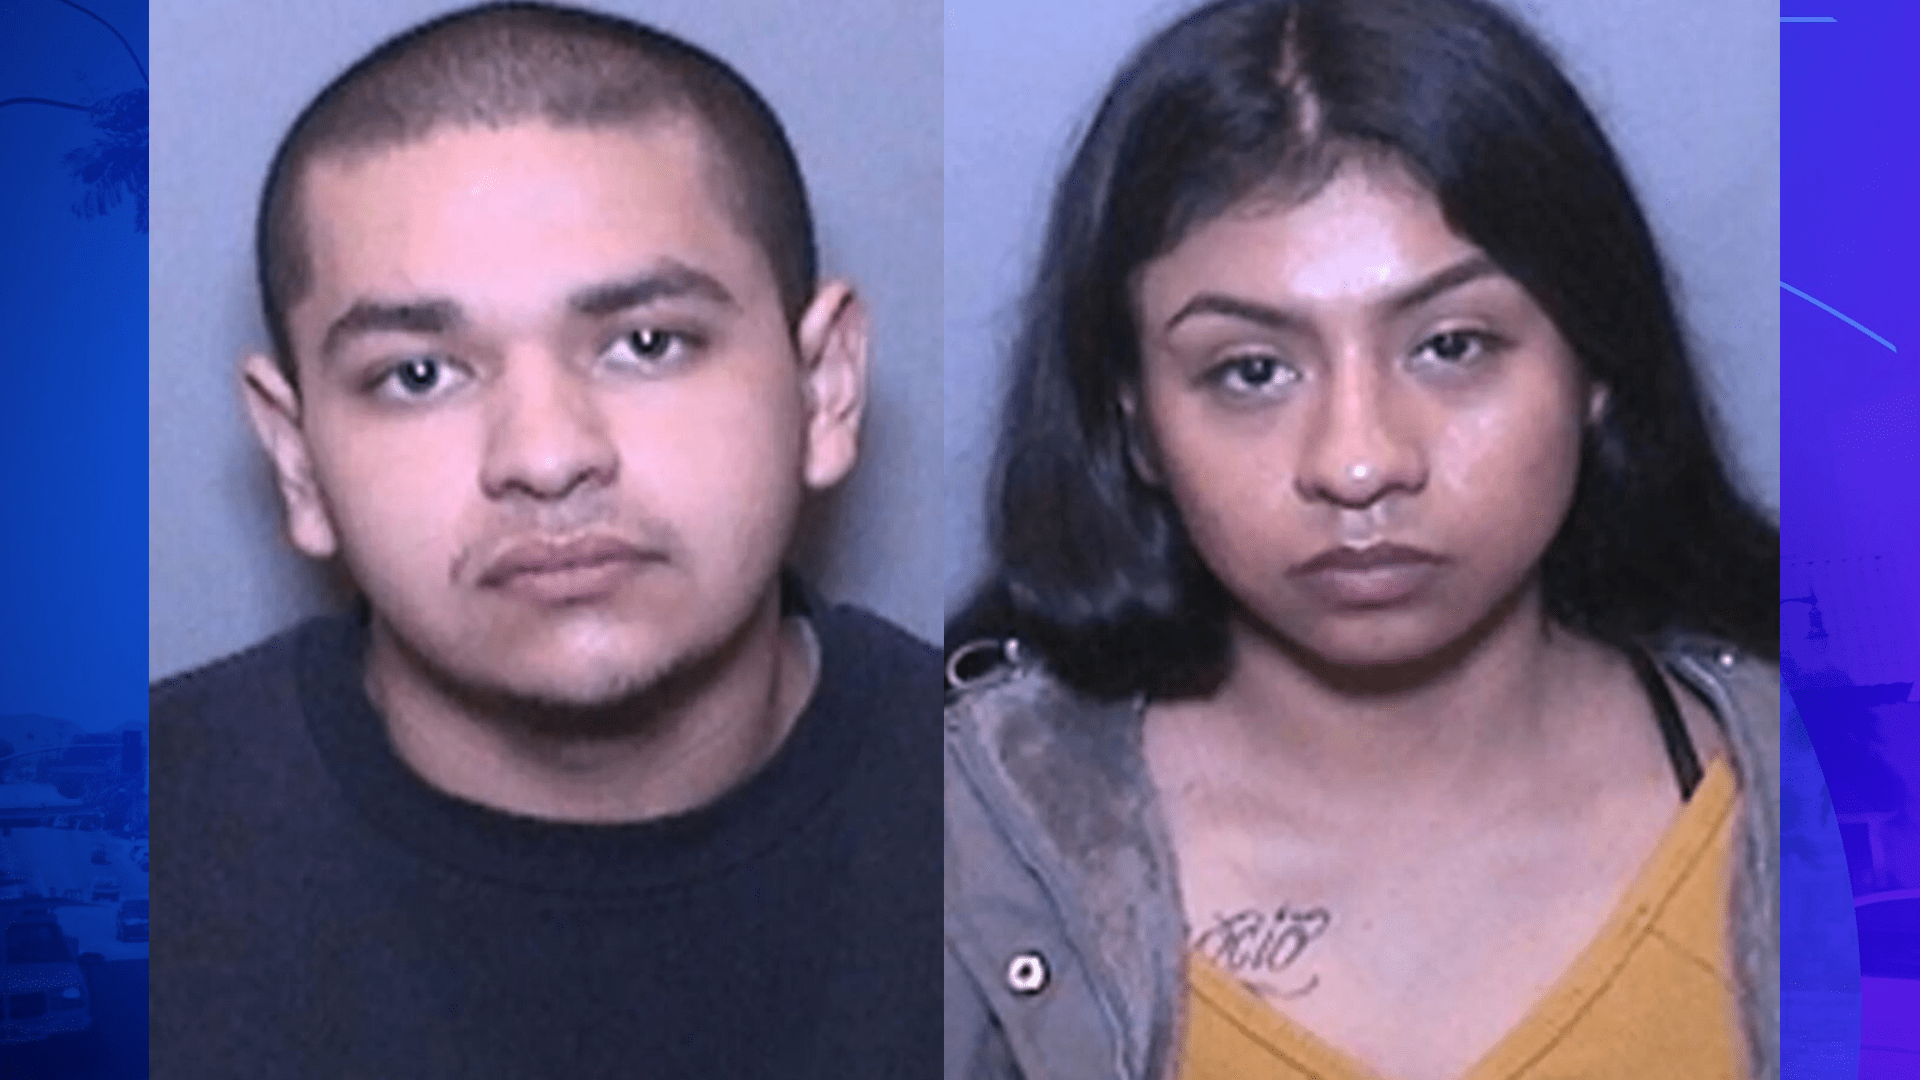 Miguel Angel Orellana, 23, and Erika Pineda, 25, in booking photos from the Orange County District Attorney's Office.